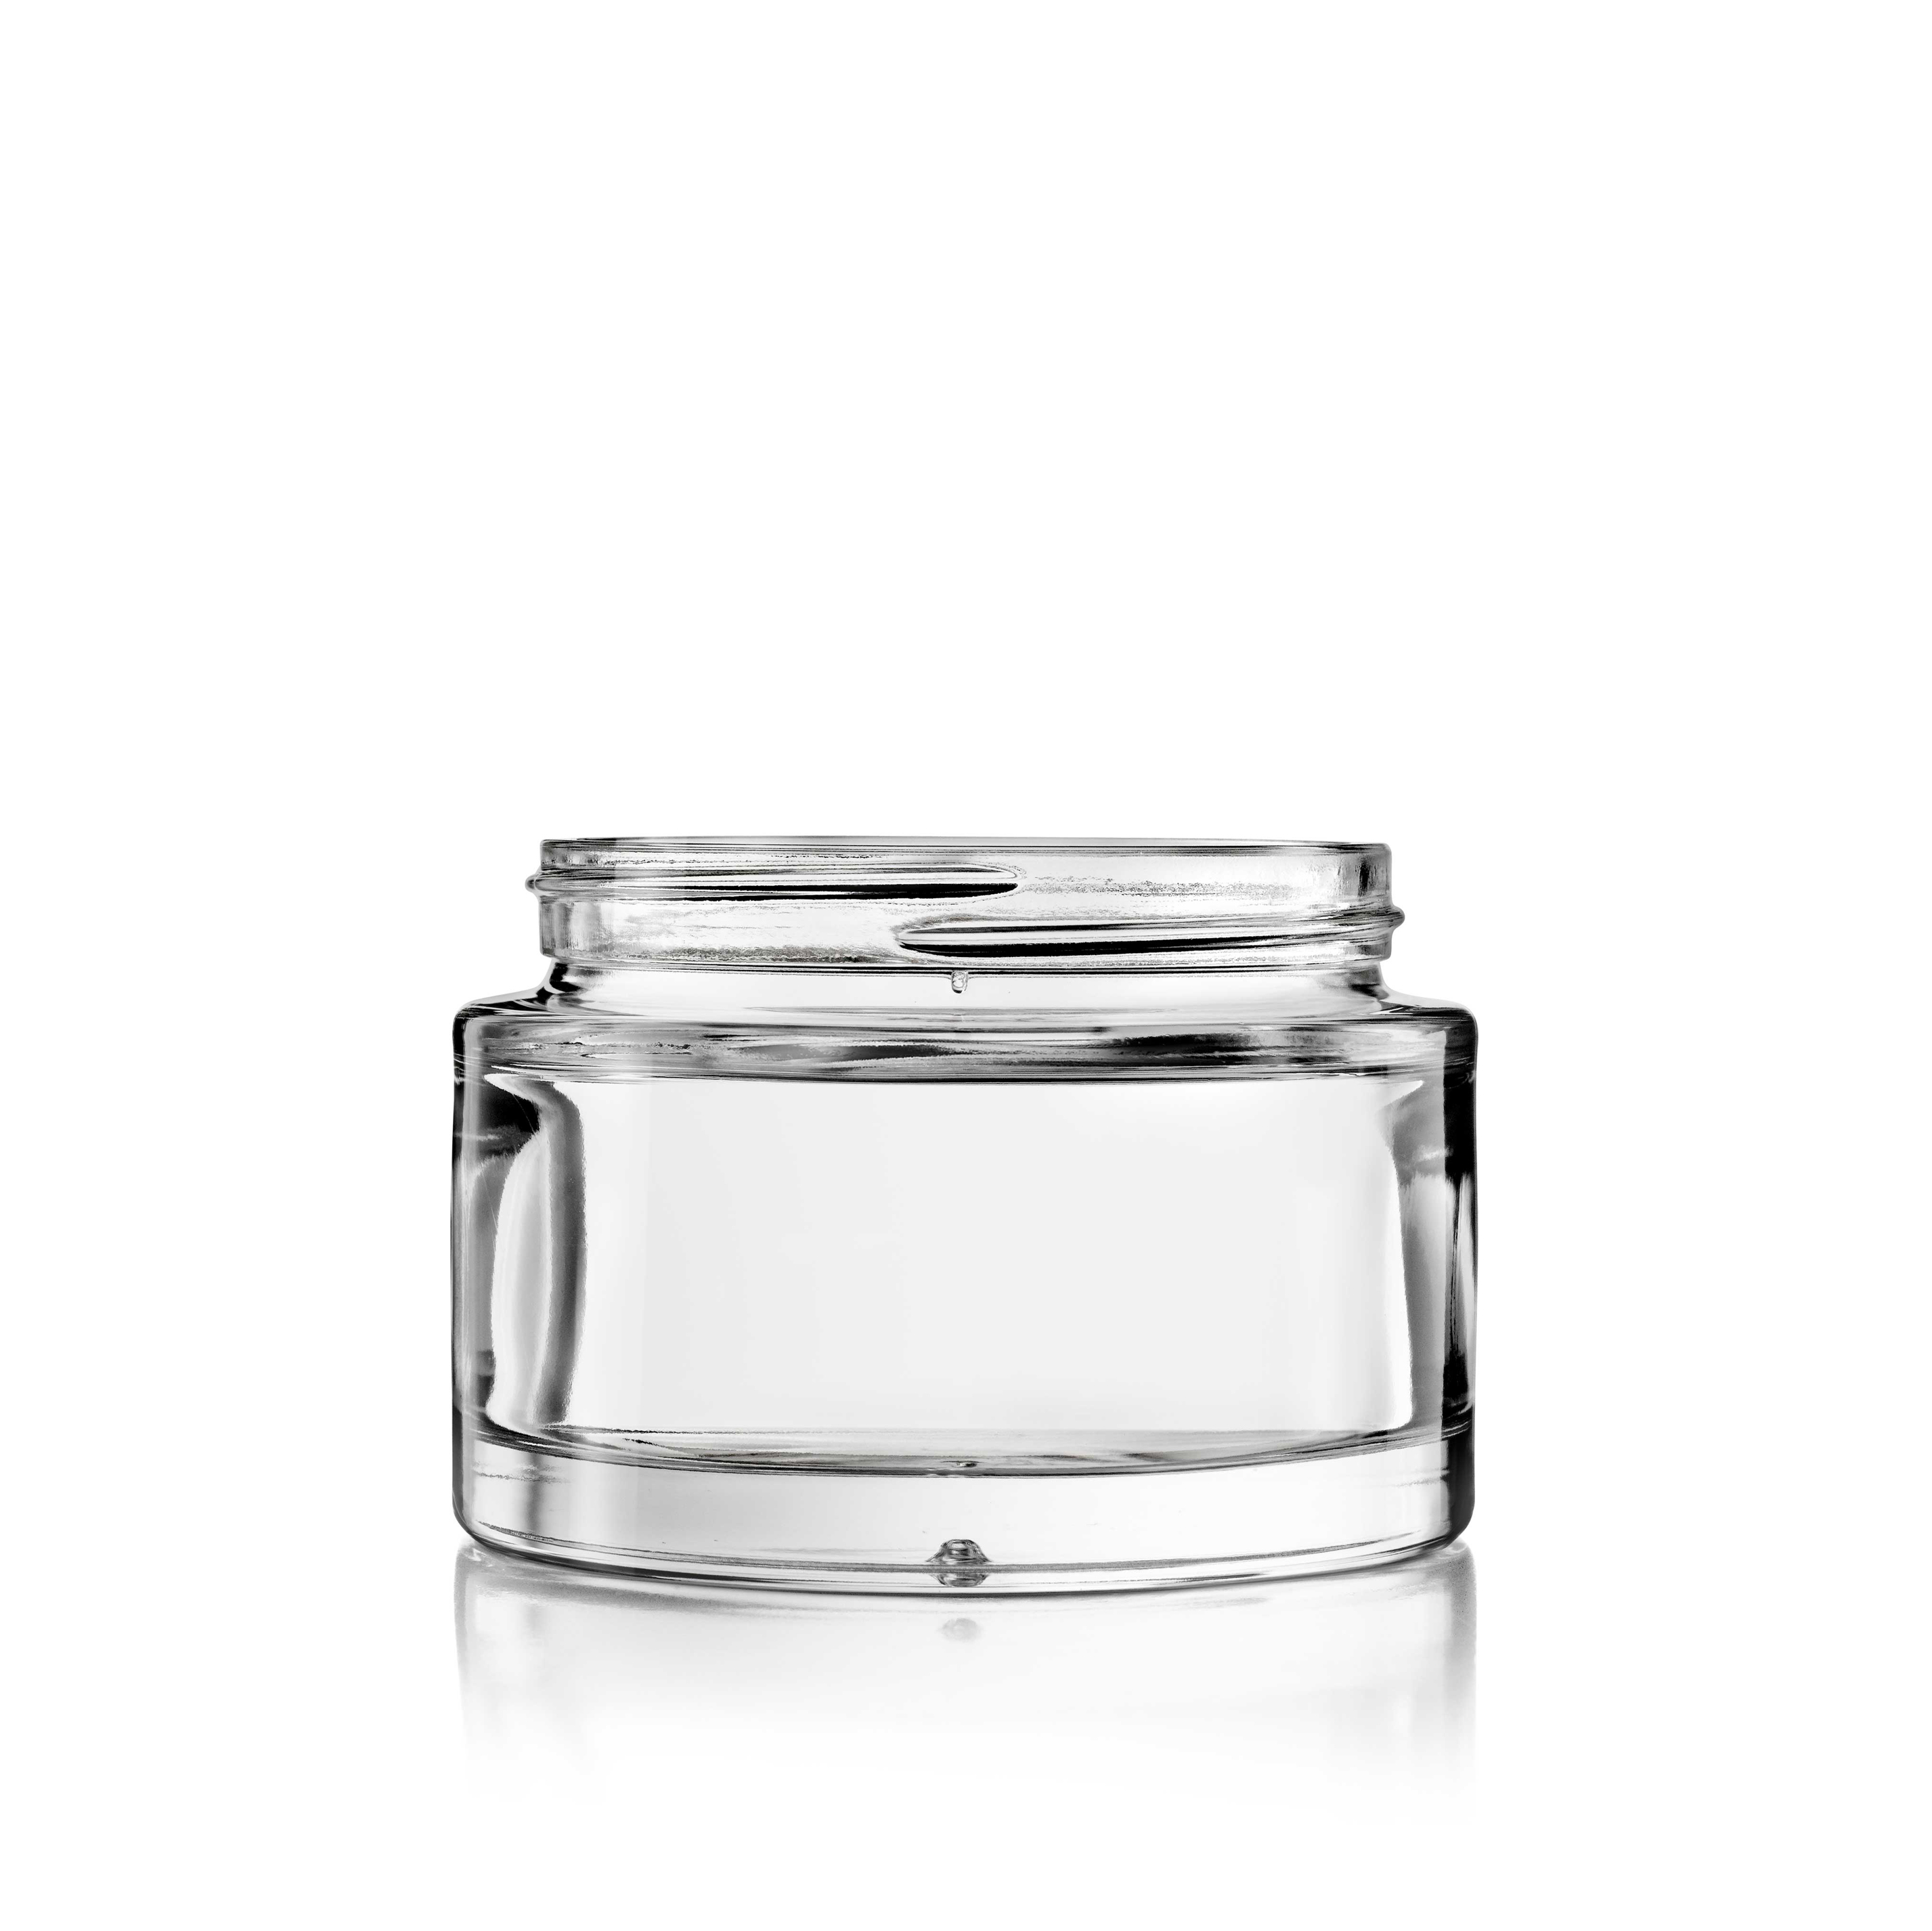 Cosmetic jar Camellia 120 ml, 67 special thread, fit for child-resistant lid, Flint